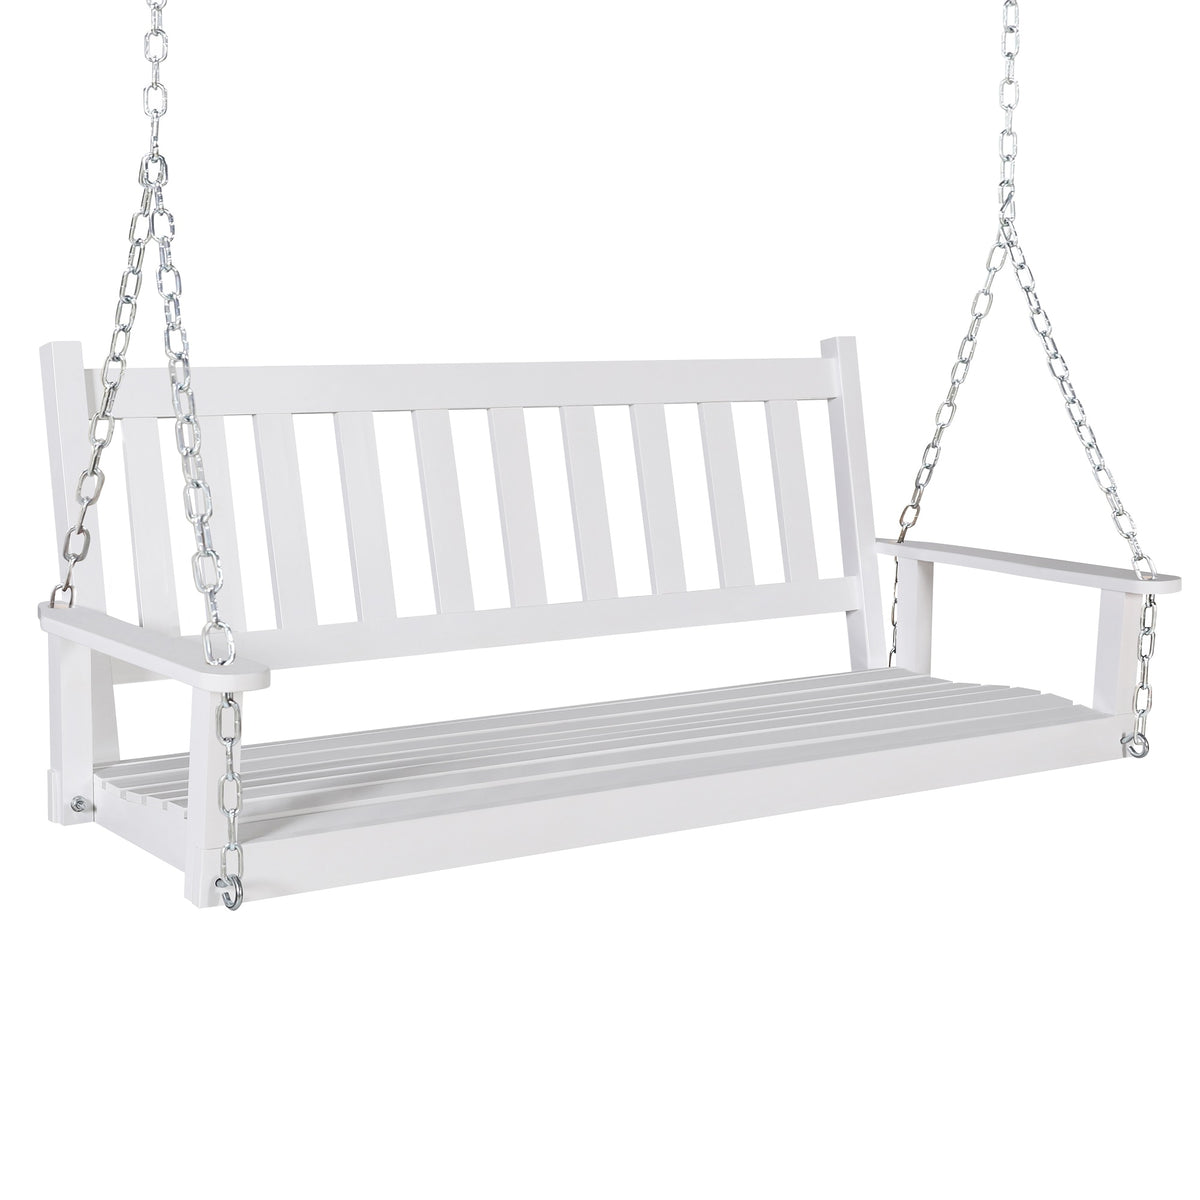 VEIKOUS Outdoor Patio Hanging Wooden Porch Swing with Chains, 2-Person Heavy Duty Swing Bench